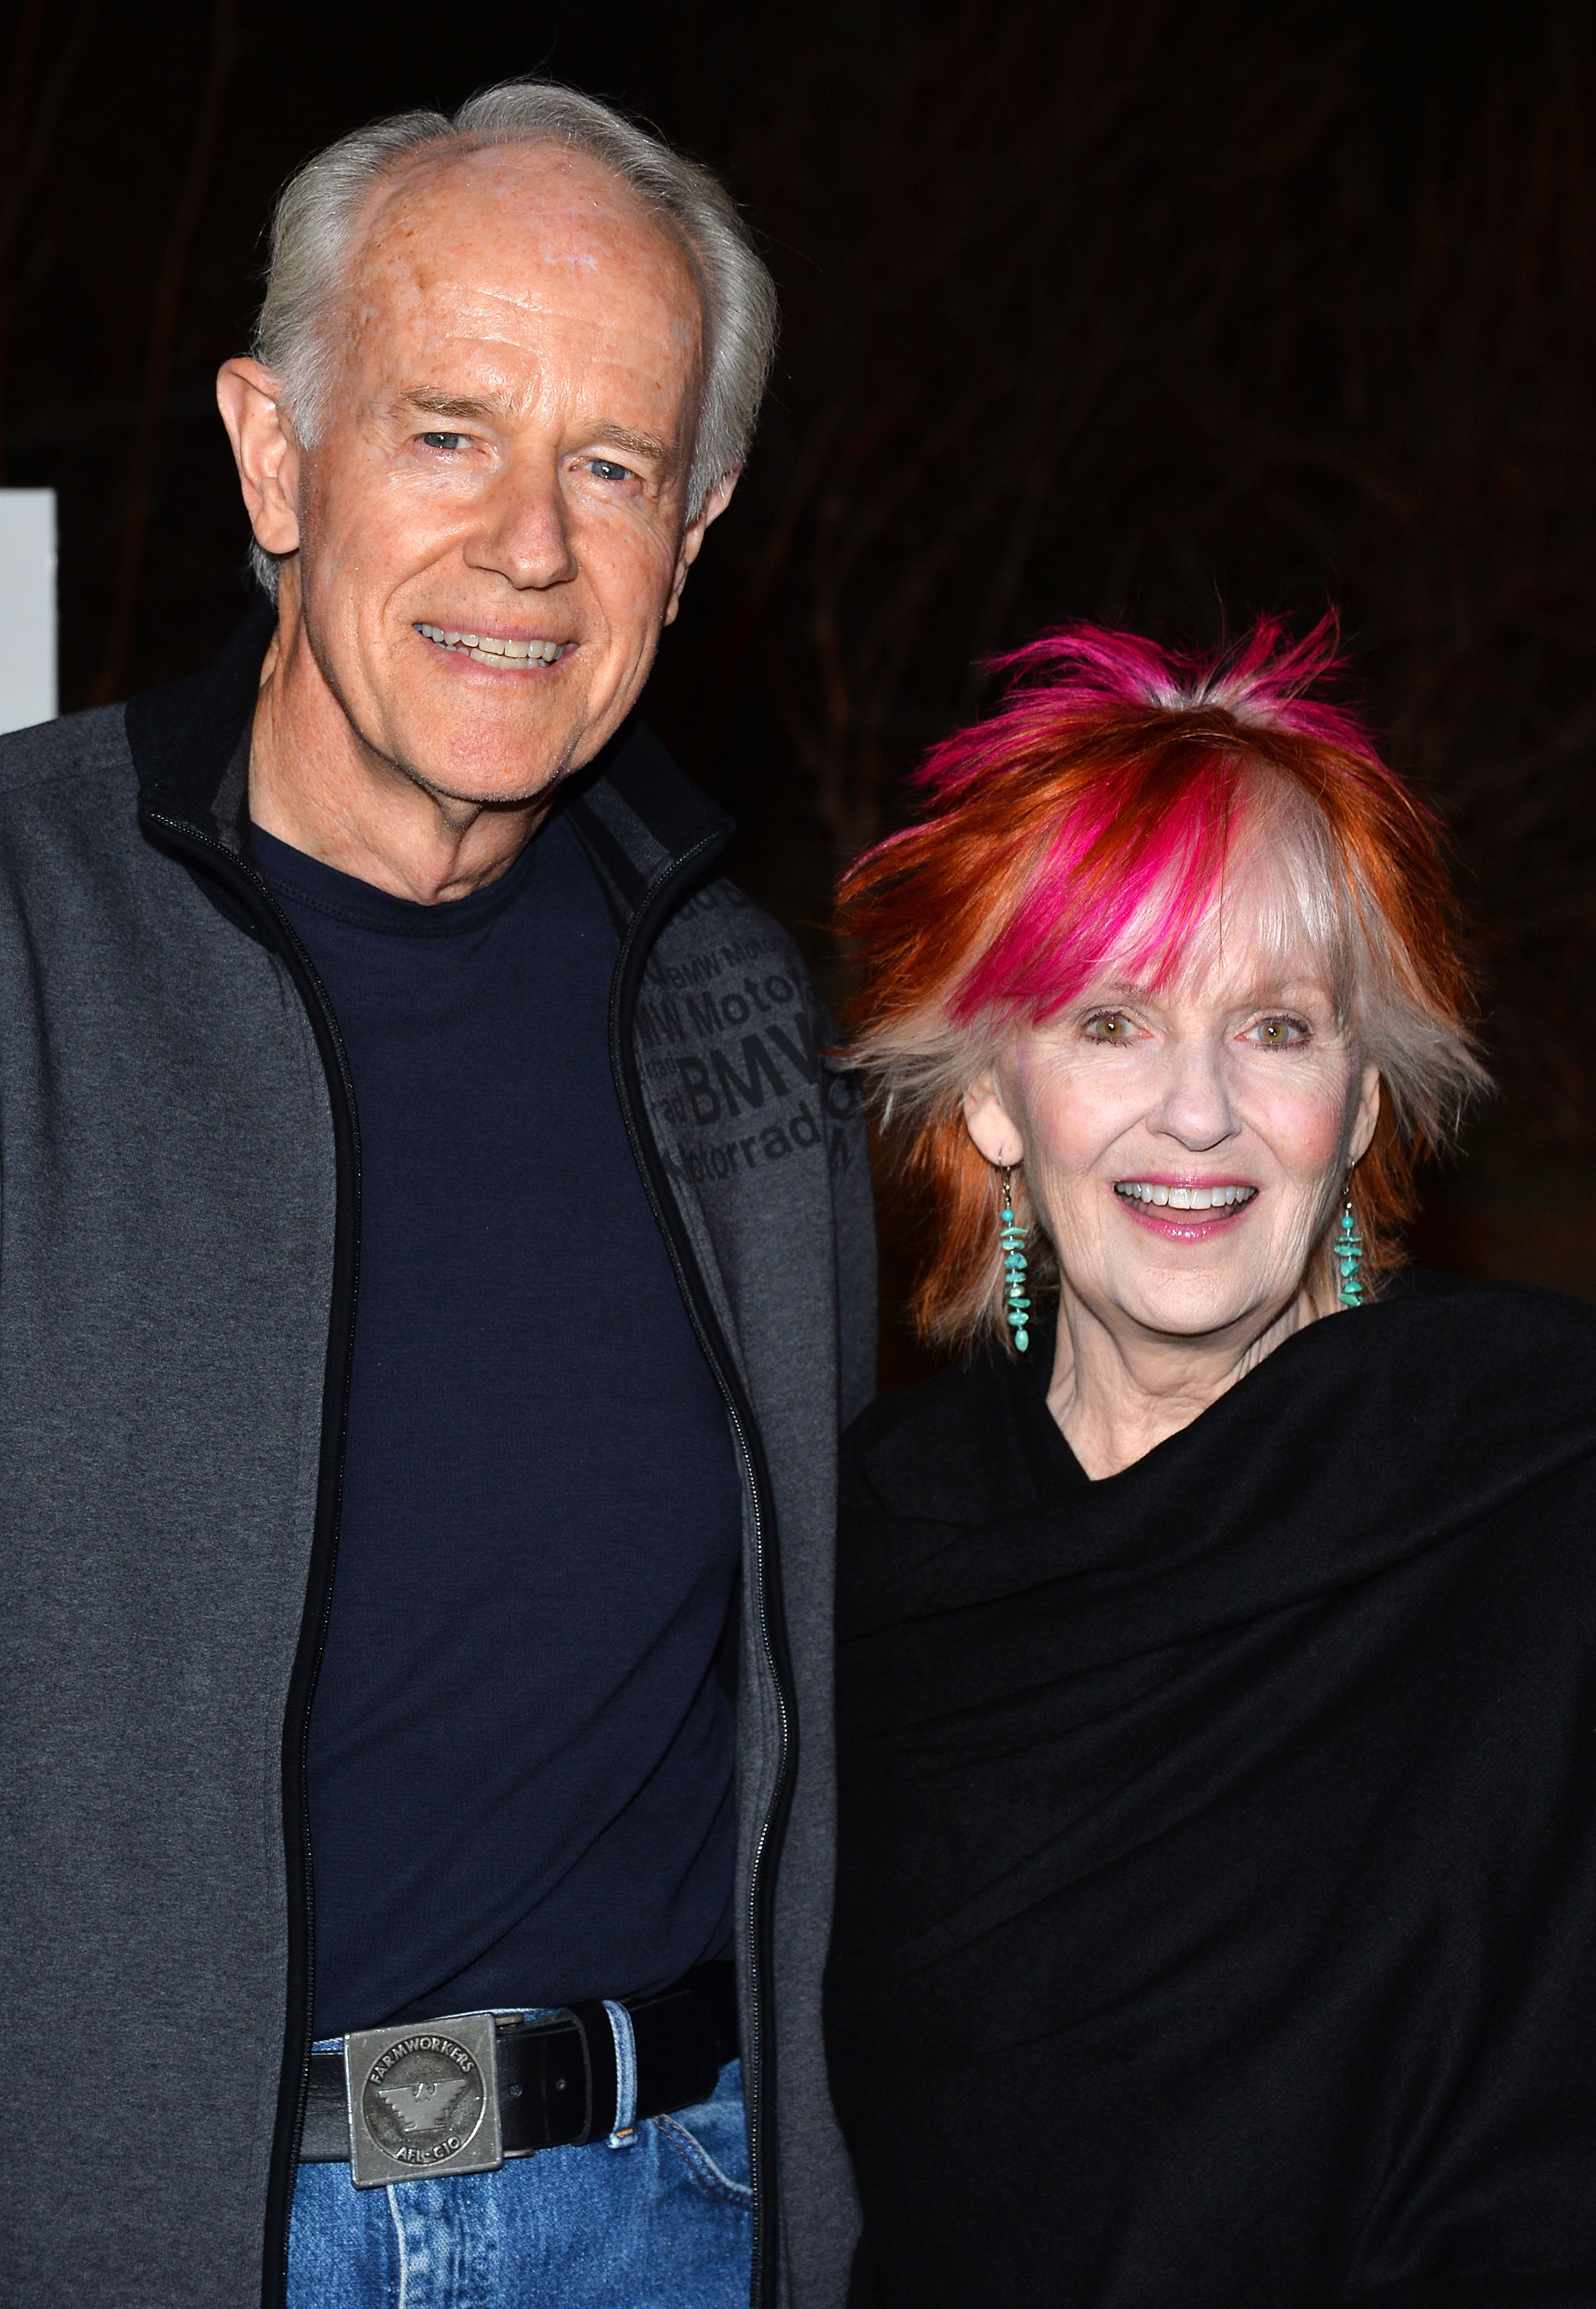 Mike Farrell and his wife, actress Shelley Fabares at Griffith Park on February 24, 2014 in Los Angeles, California | Source: Getty Images